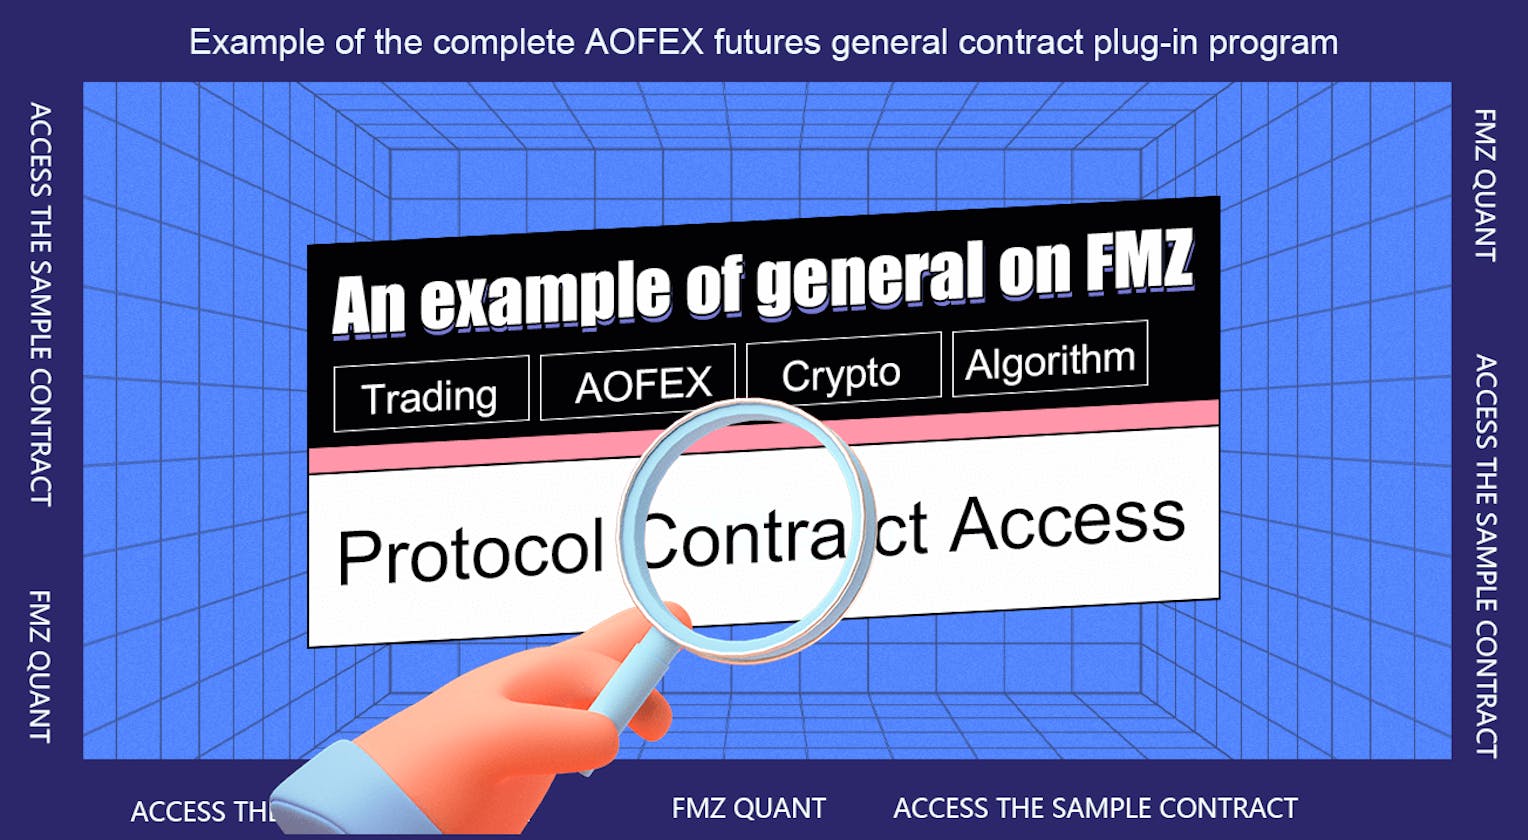 An example of general protocol contract access on FMZ